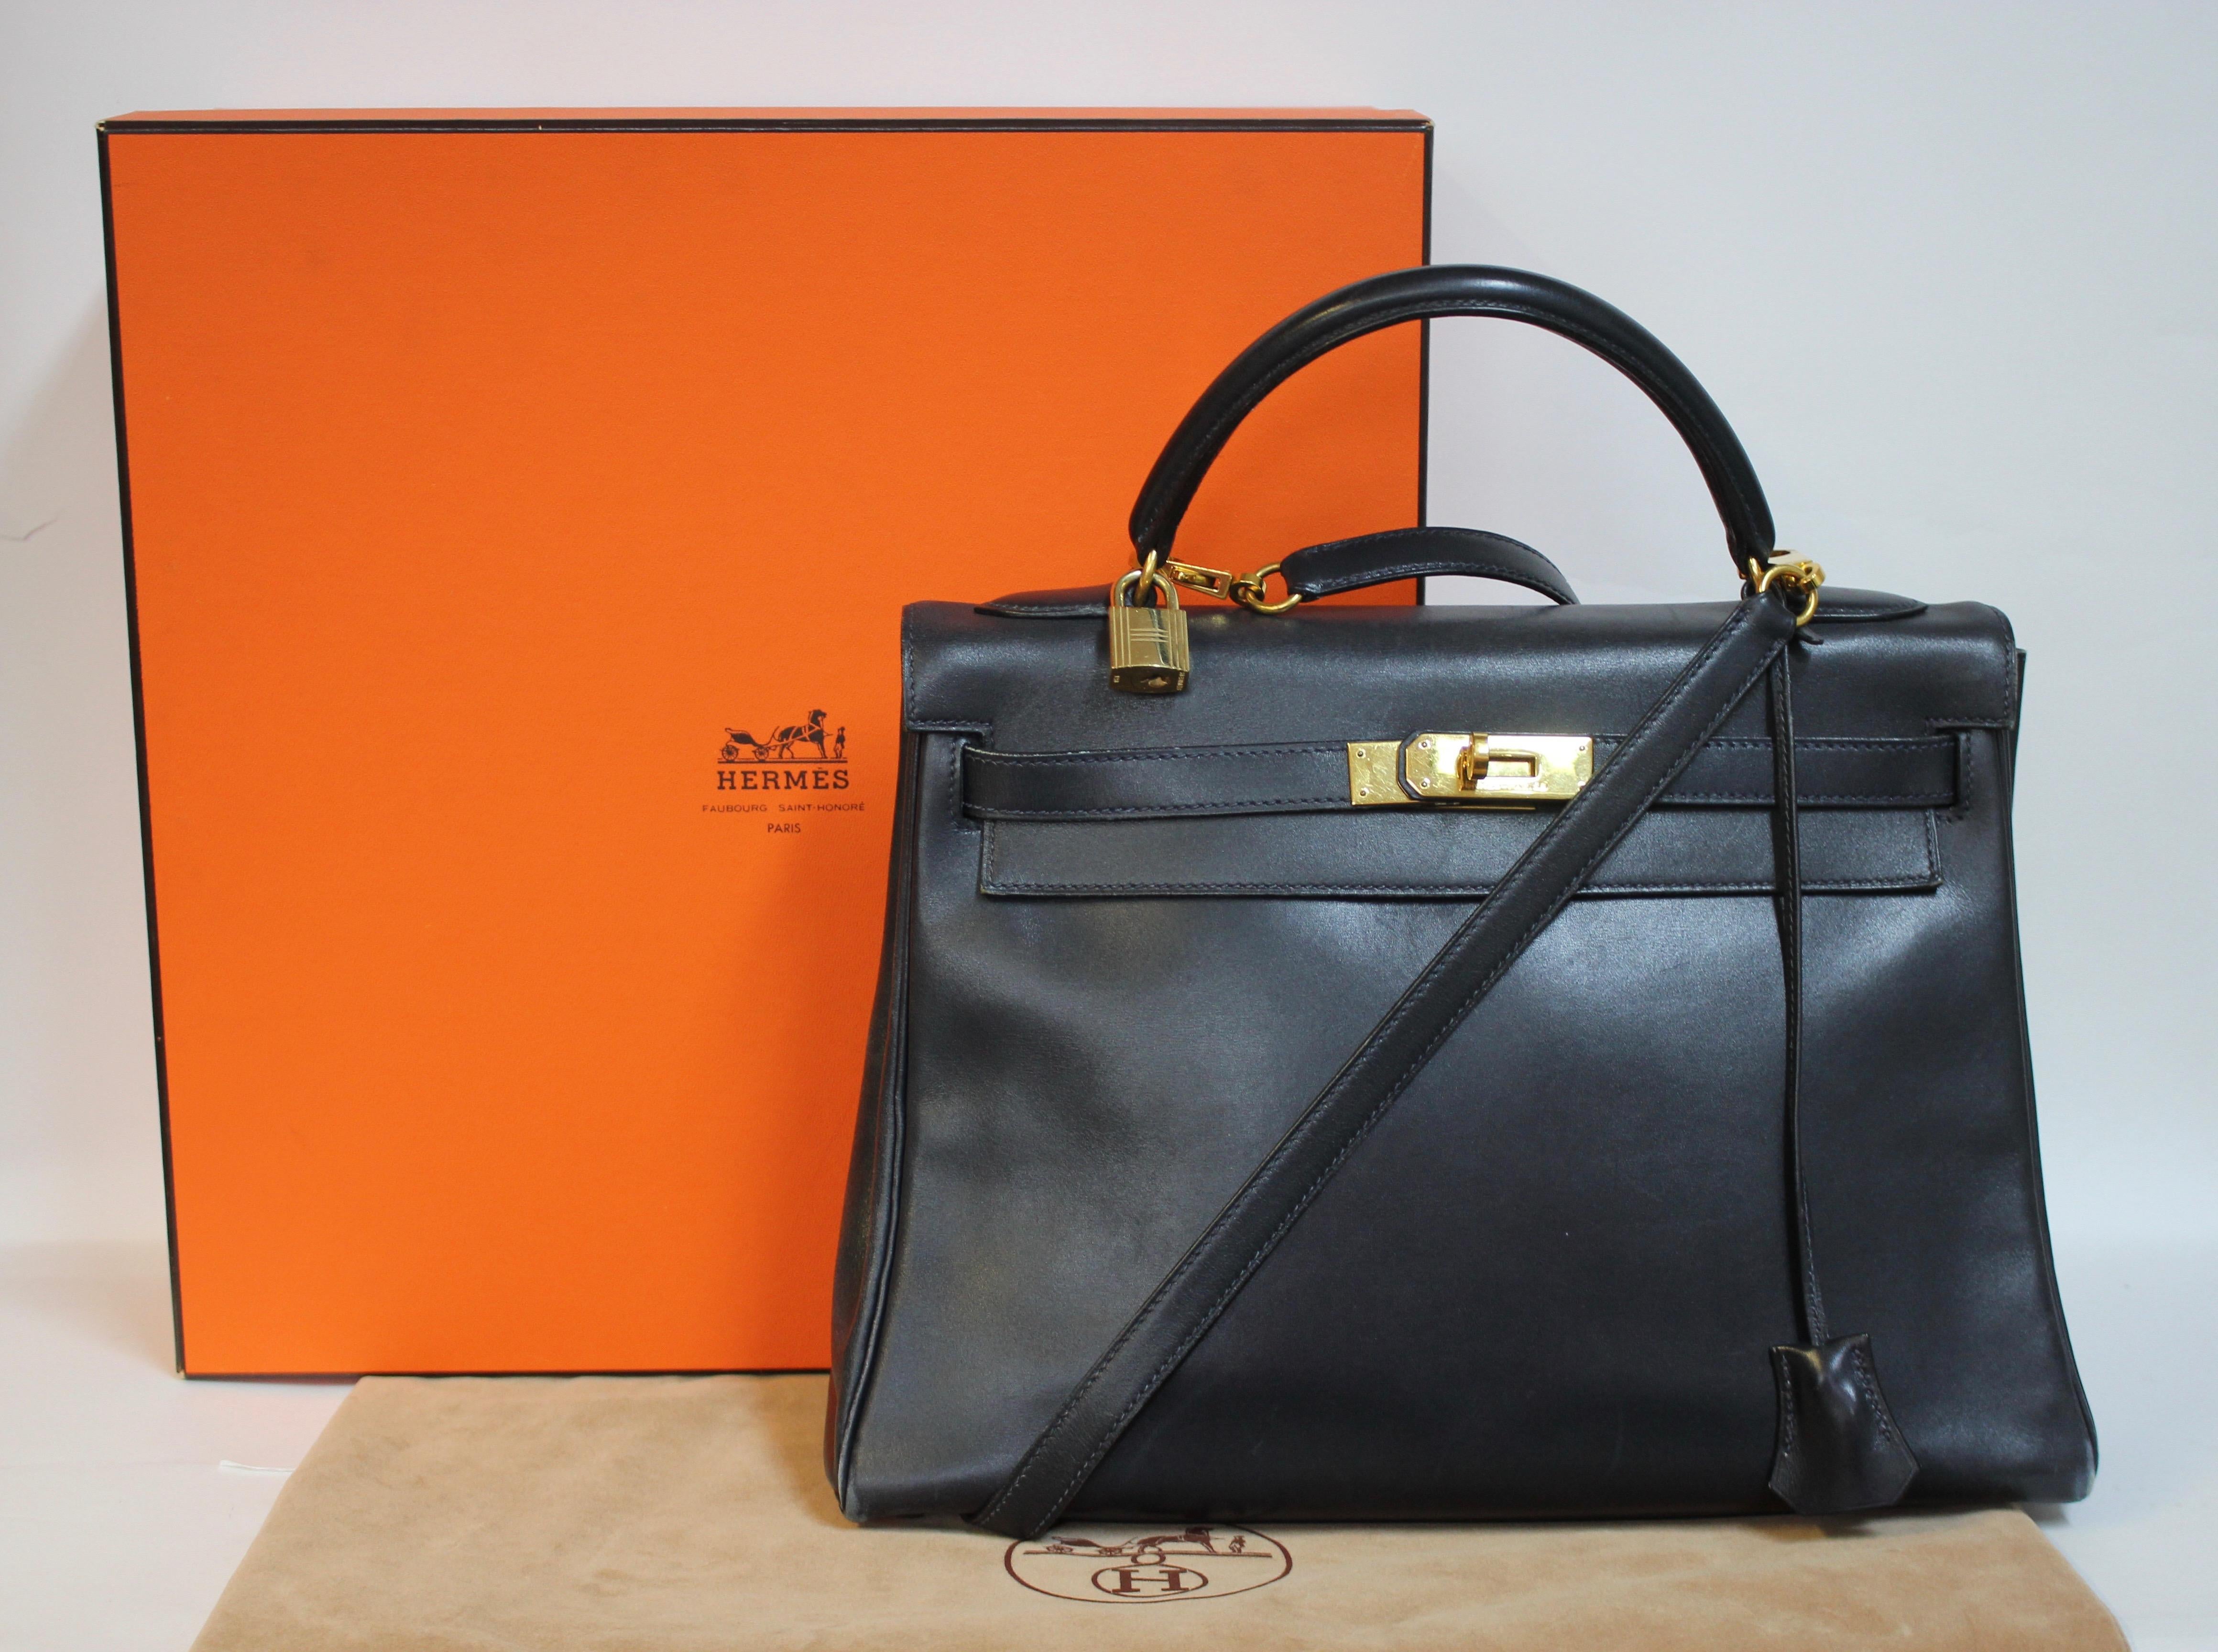 Iconic and timeless Hermes Kelly Bag 32 in navy blue with gold hardware.
It comes with original dust bag, original box and certificate of authenticity.

The bag has some age-appropriate signs of wear that you can see in the Images.
The authenticity